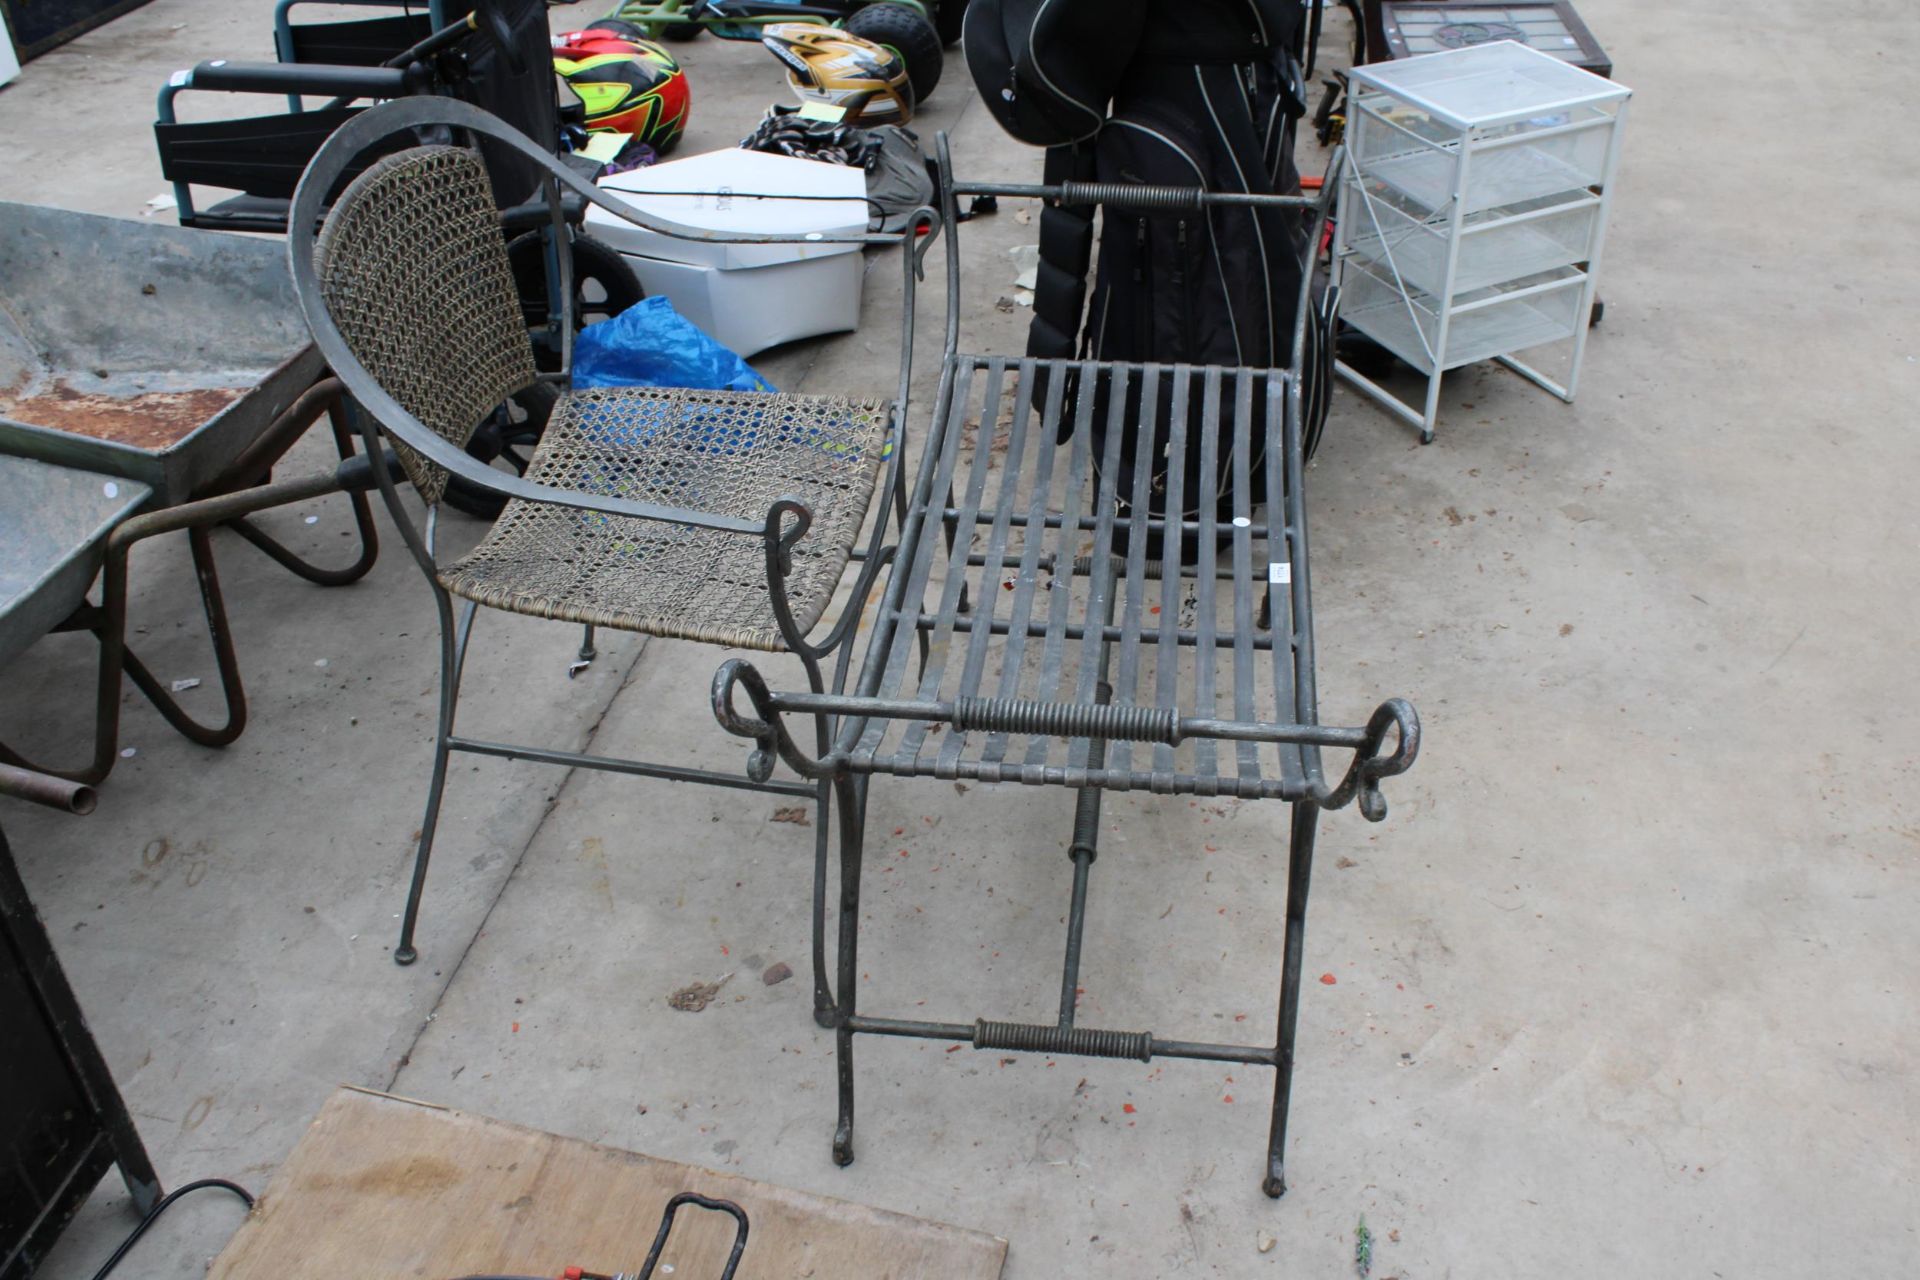 A METAL GARDEN CHAIR WITH RATTAN SEAT AND BACK AND A SIMILAR HEAVY METAL BENCH - Image 2 of 3